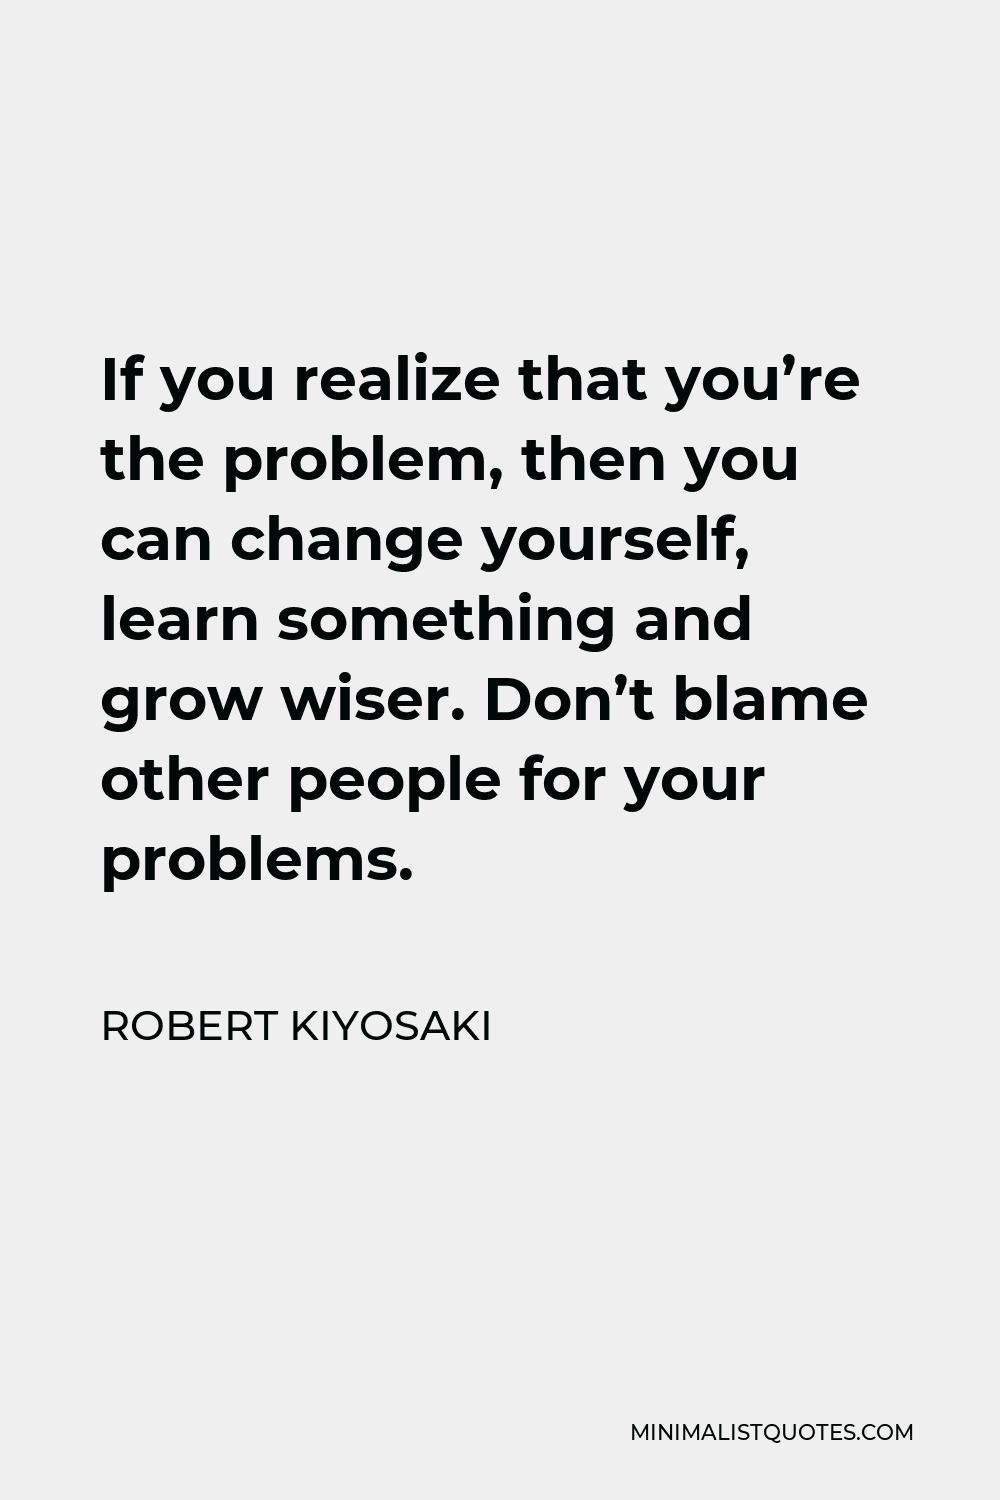 Robert Kiyosaki Quote - If you realize that you’re the problem, then you can change yourself, learn something and grow wiser. Don’t blame other people for your problems.